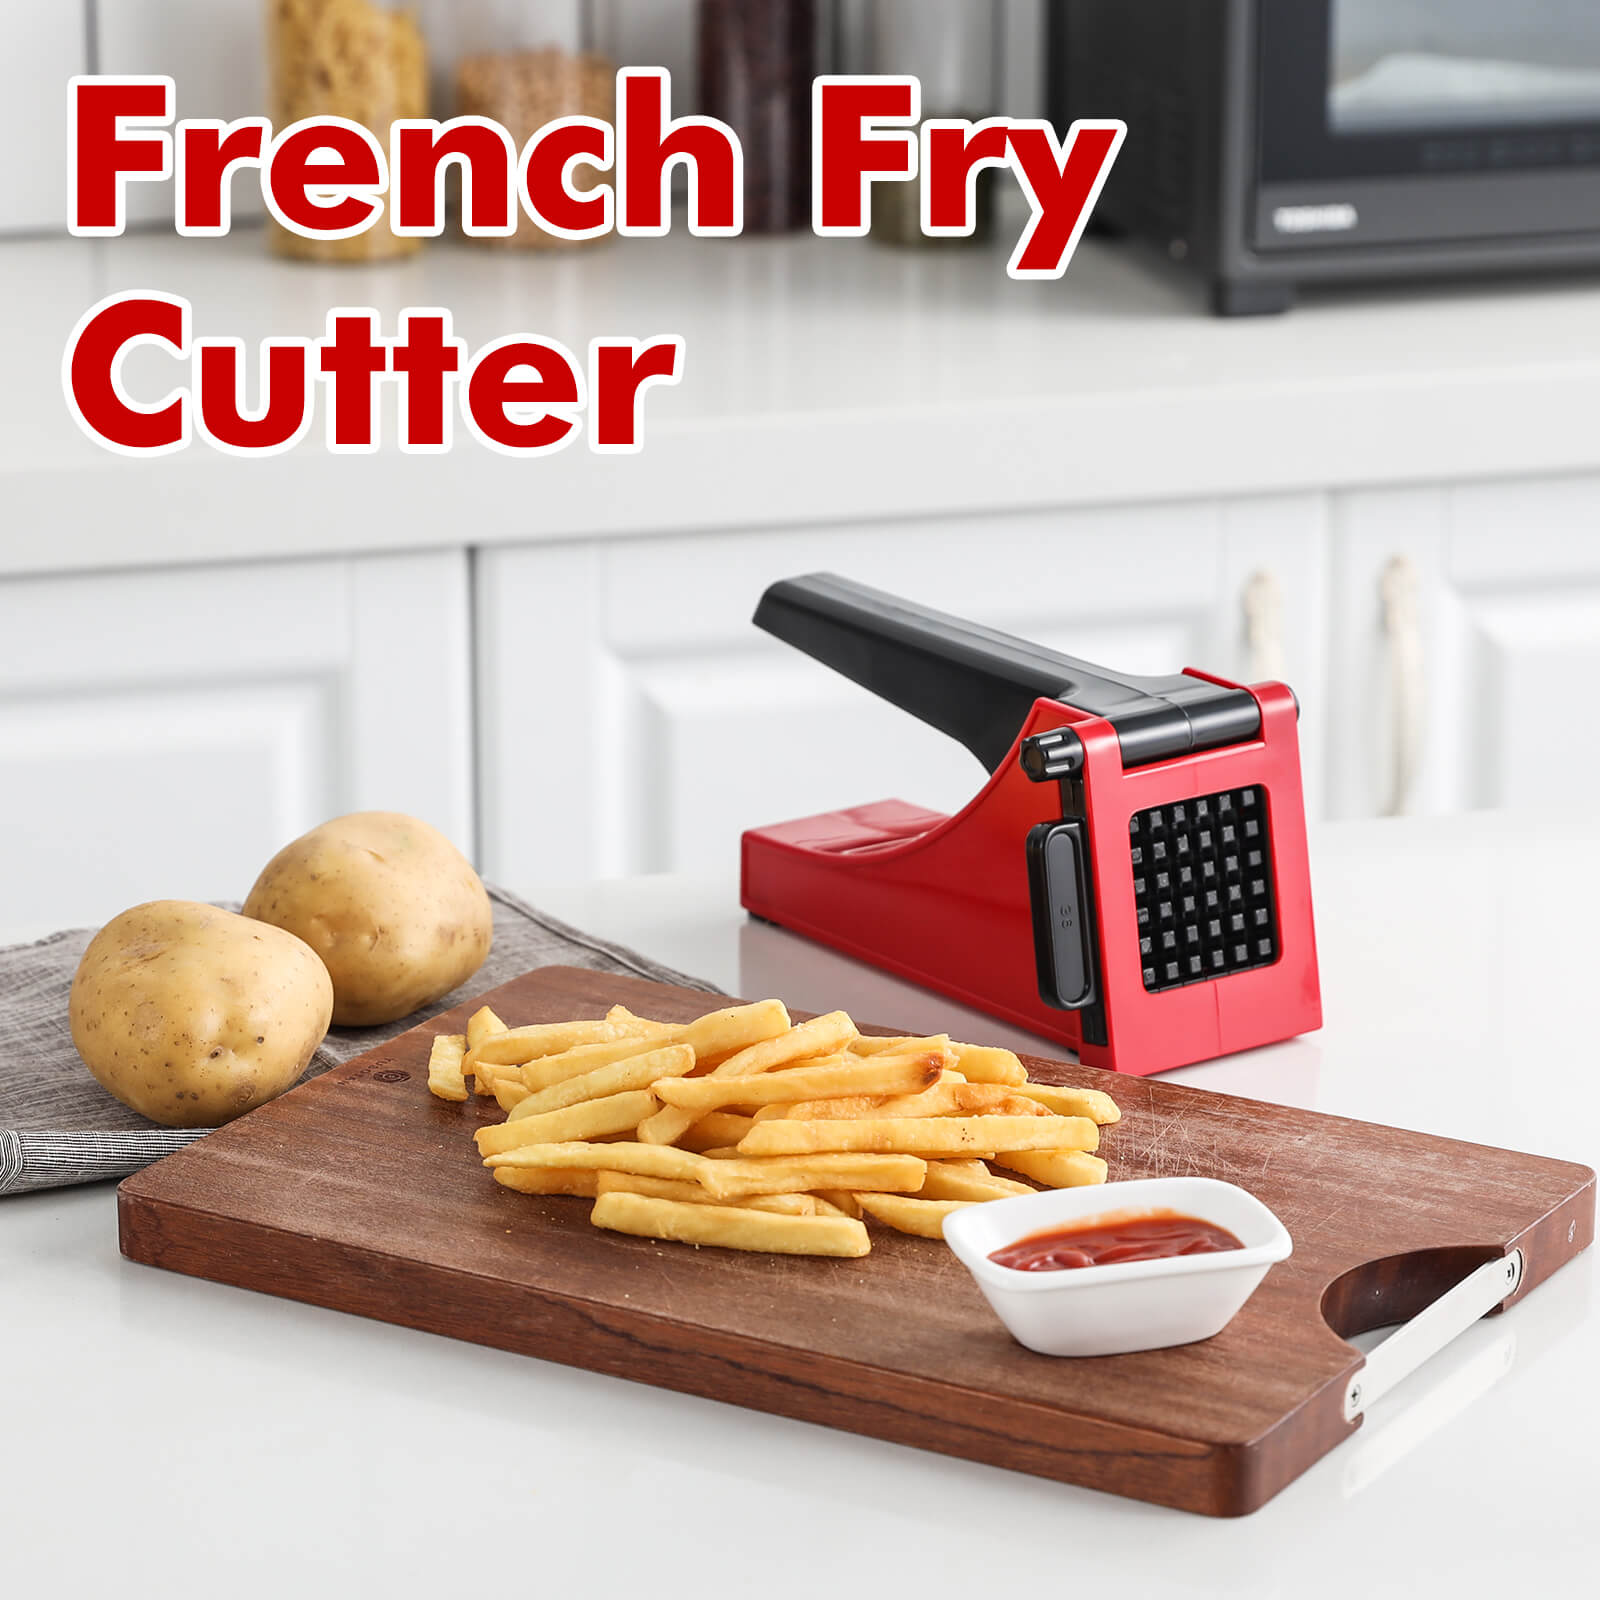 French Fry Maker, French Fry Cutter, Potato Slicer, Vintage French